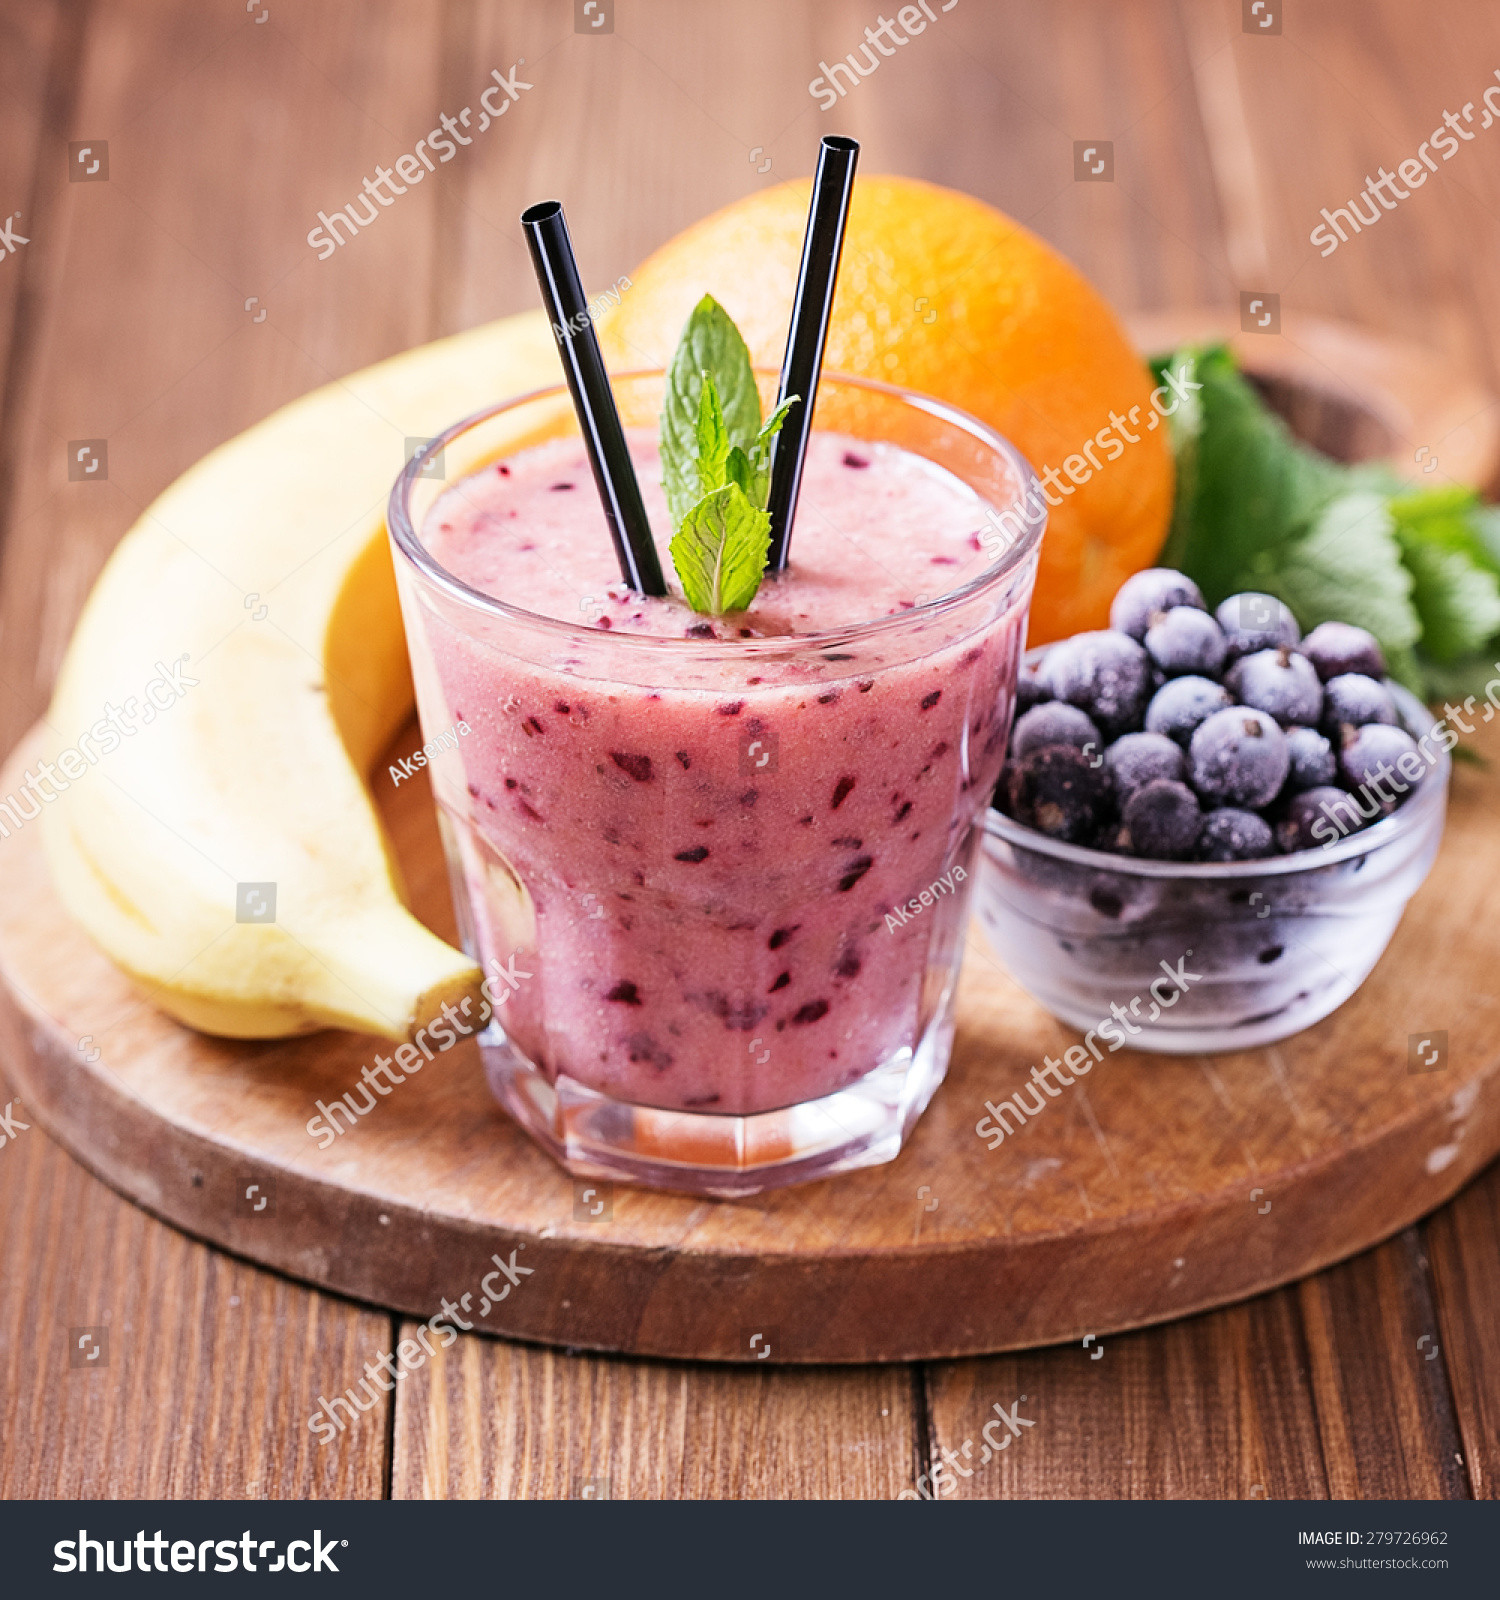 Ingredients For Healthy Fruit Smoothies
 Fruit Smoothies Made Fresh Ingre nts Stock